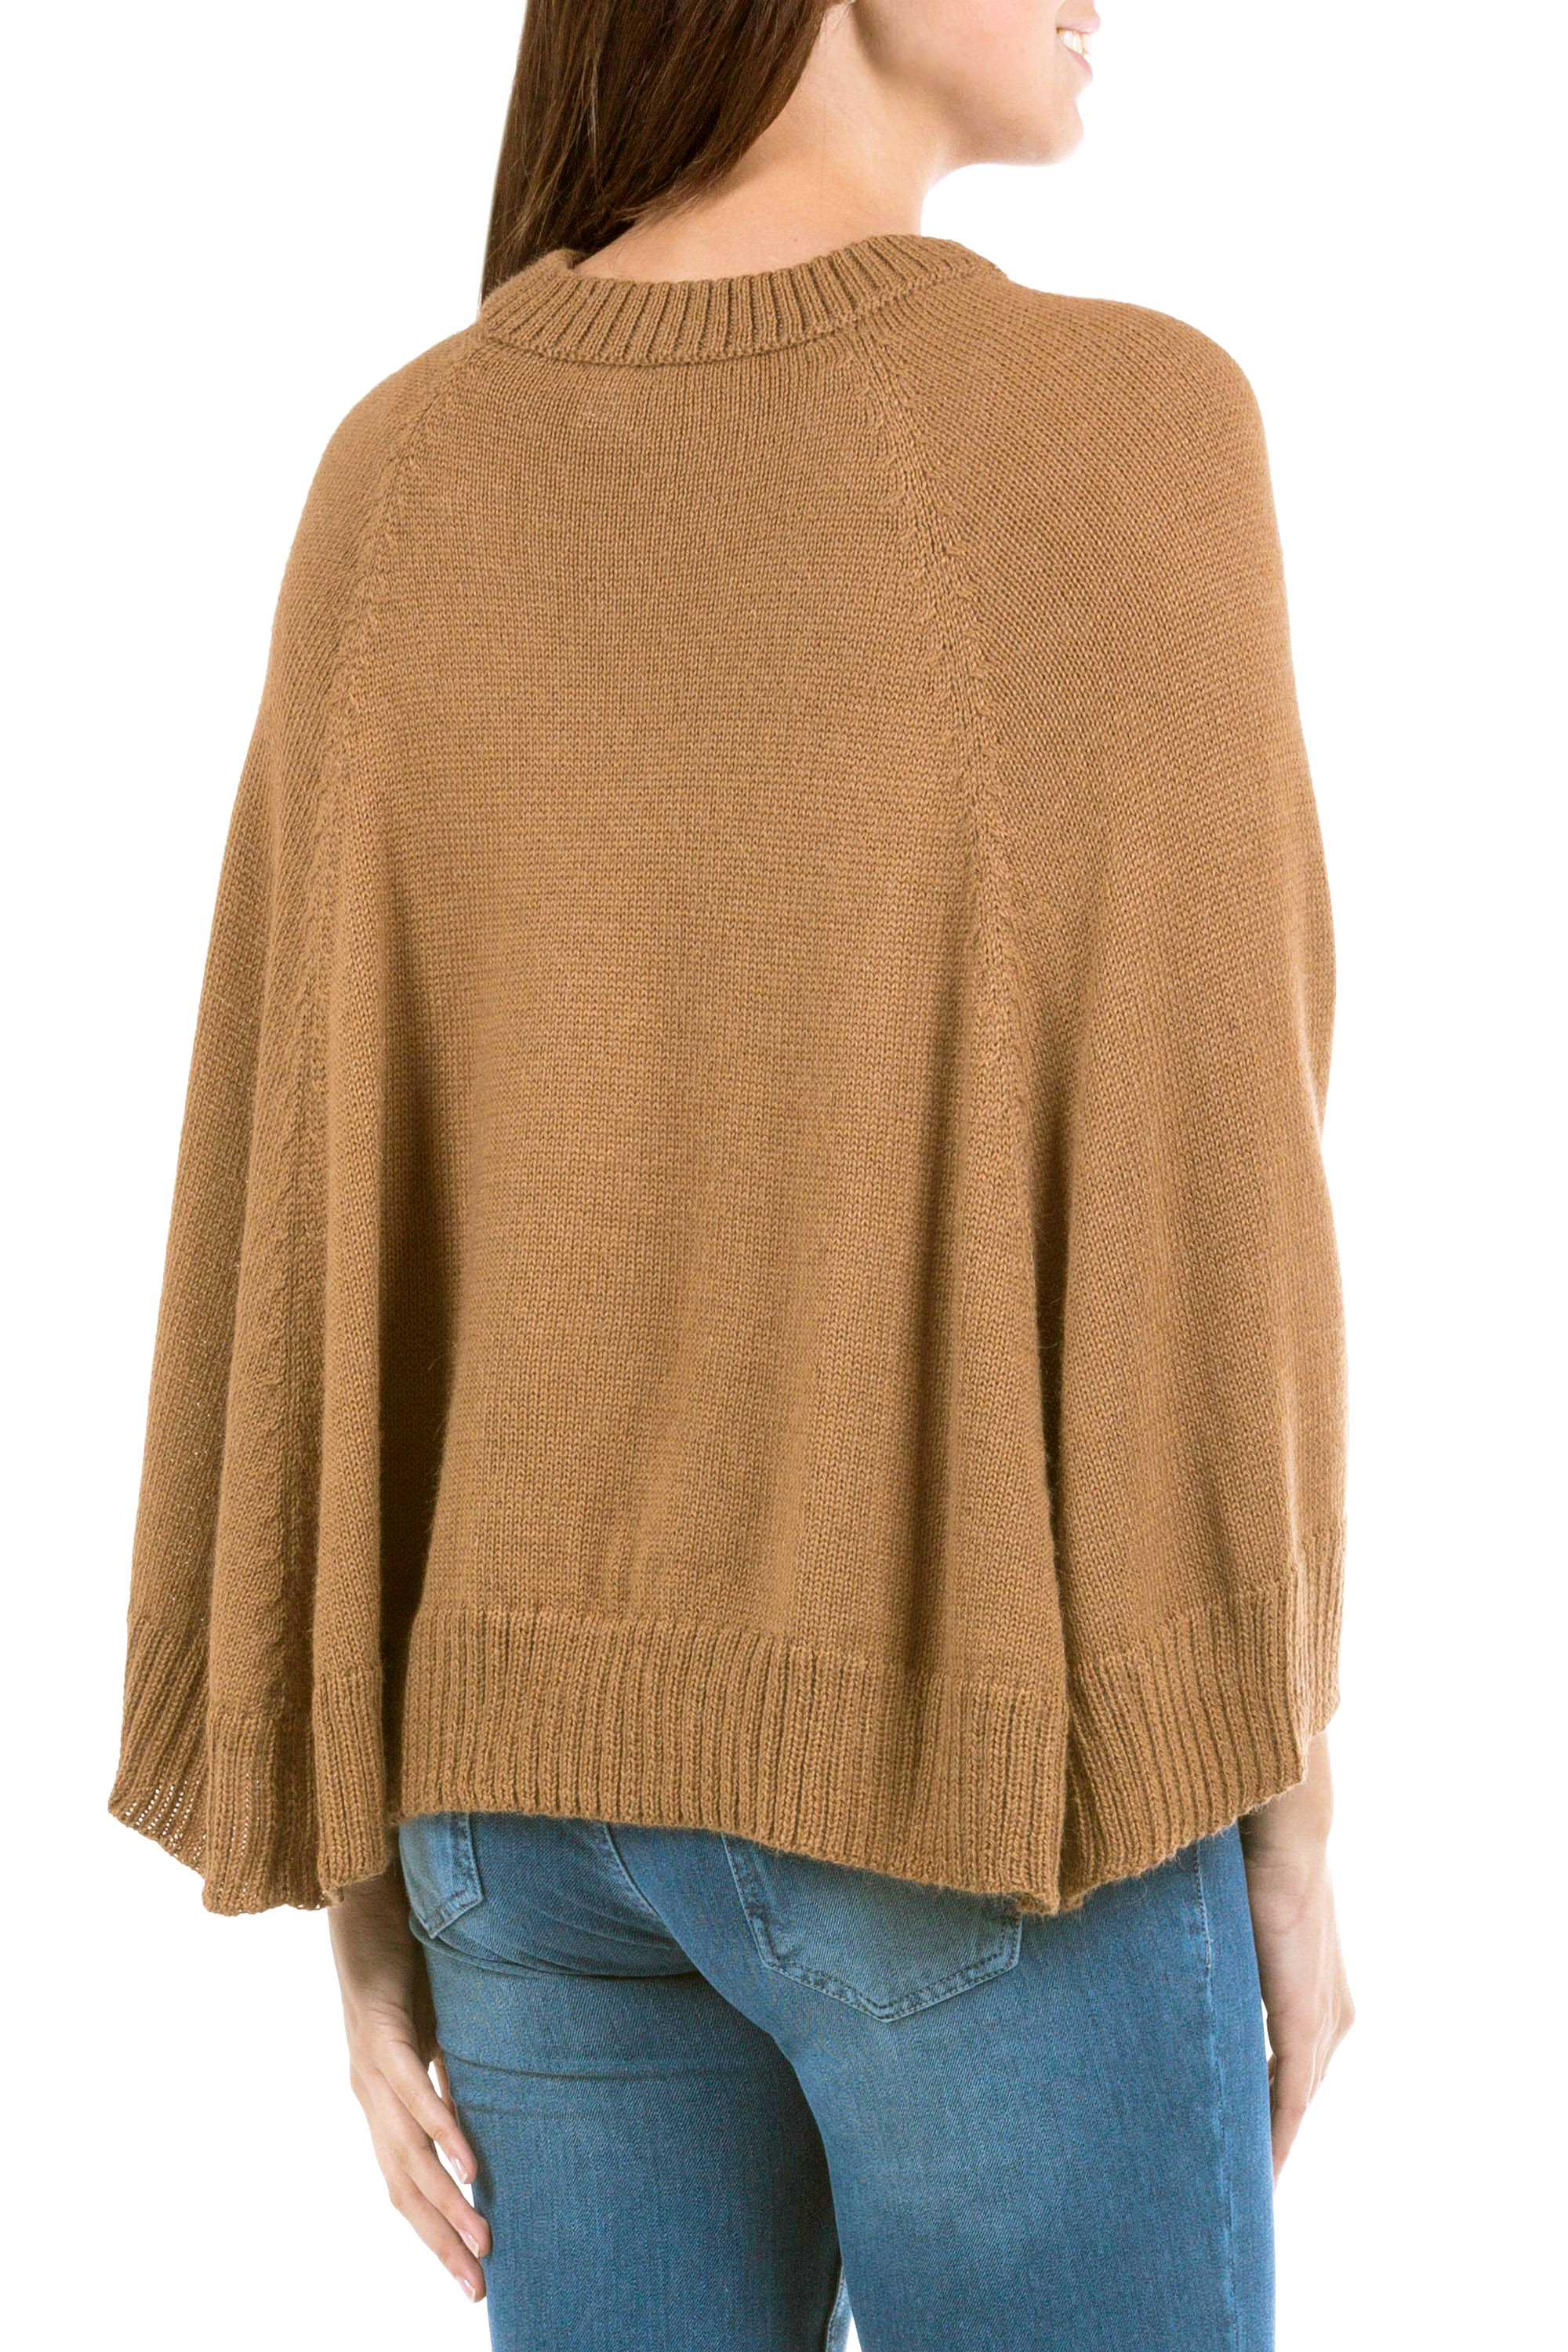 Knit Brown Alpaca Blend Poncho with Fretwork from Peru - Andes in Brown ...